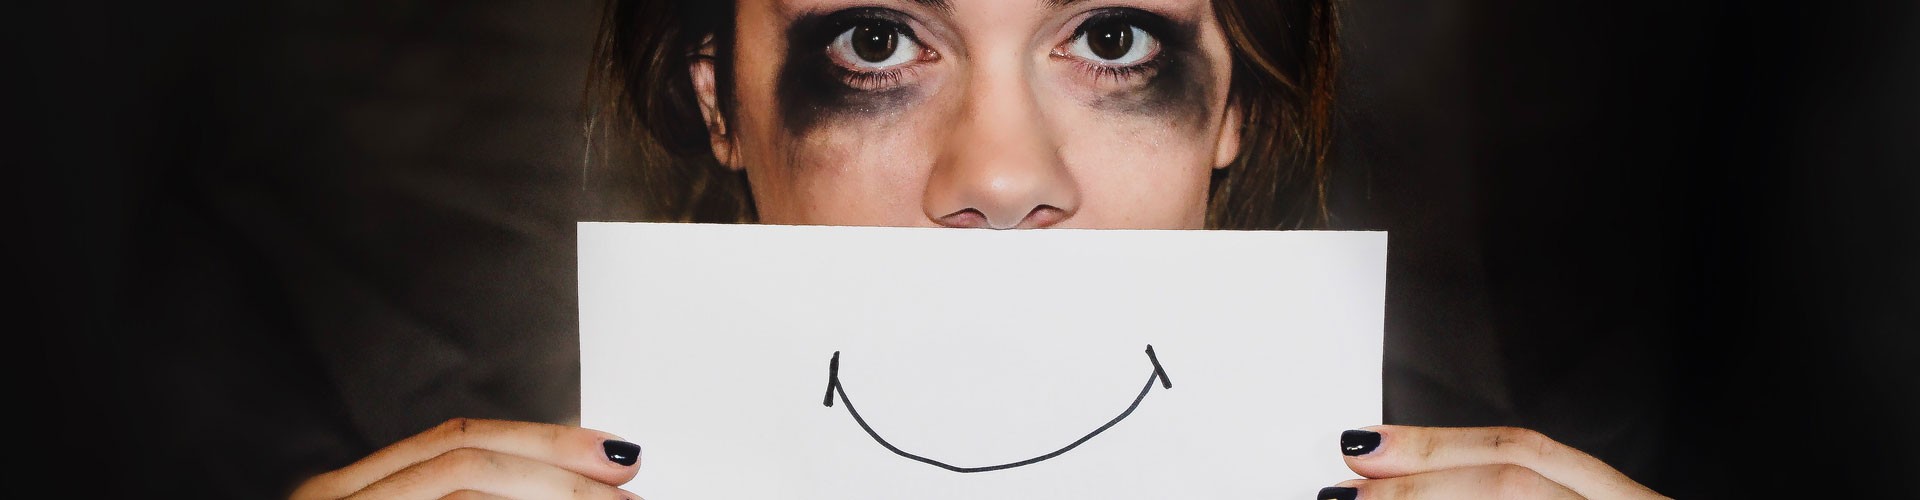 woman with tear stained makeup holds paper with a smile in front of mouth